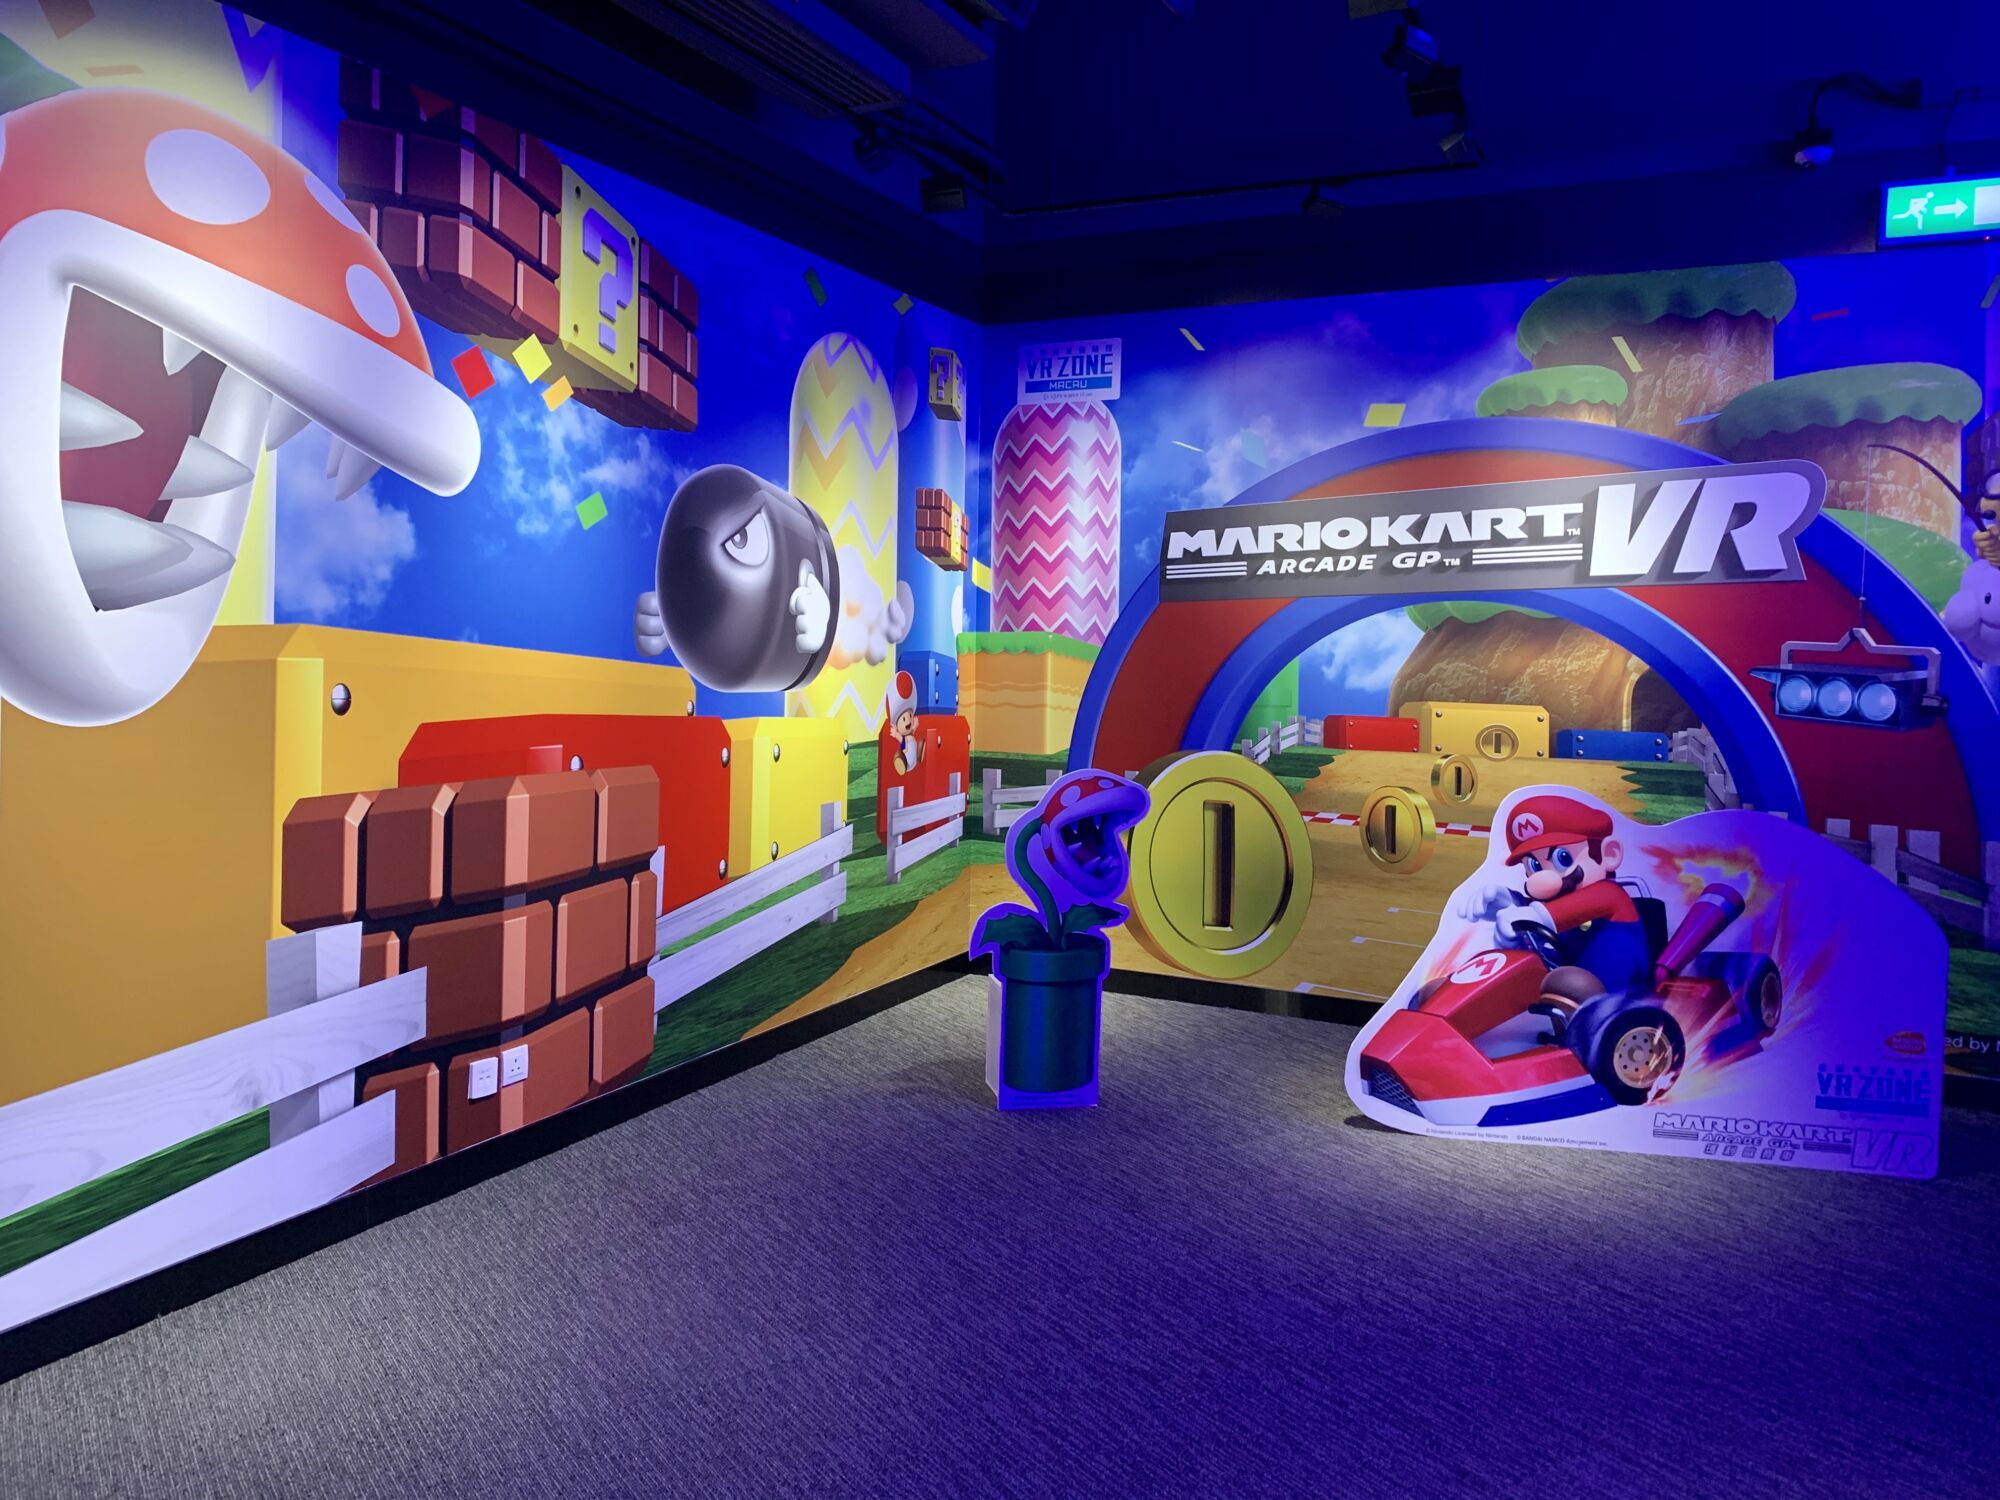 VR Zone Fishermans Wharf Inside Mario Karts Poster Macau Lifestyle Activity Classes for Adults